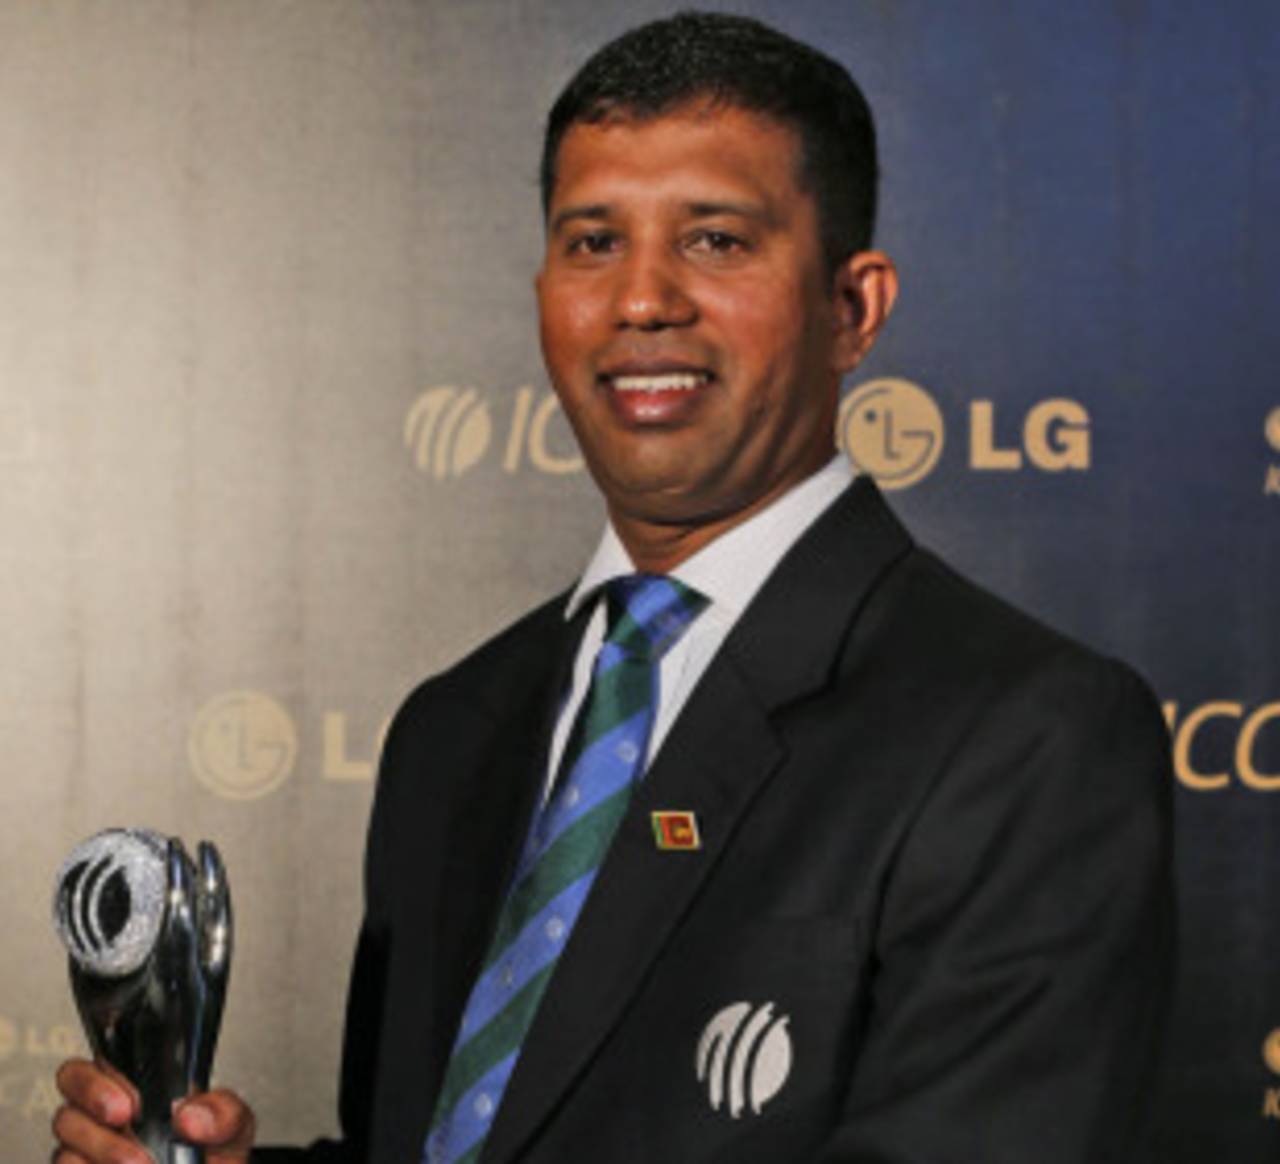 Kumar Dharmasena: "This award means a lot to me, after playing cricket for 12 years. It's for the Sri Lankan umpires and the community who looked after my growth"&nbsp;&nbsp;&bull;&nbsp;&nbsp;Associated Press